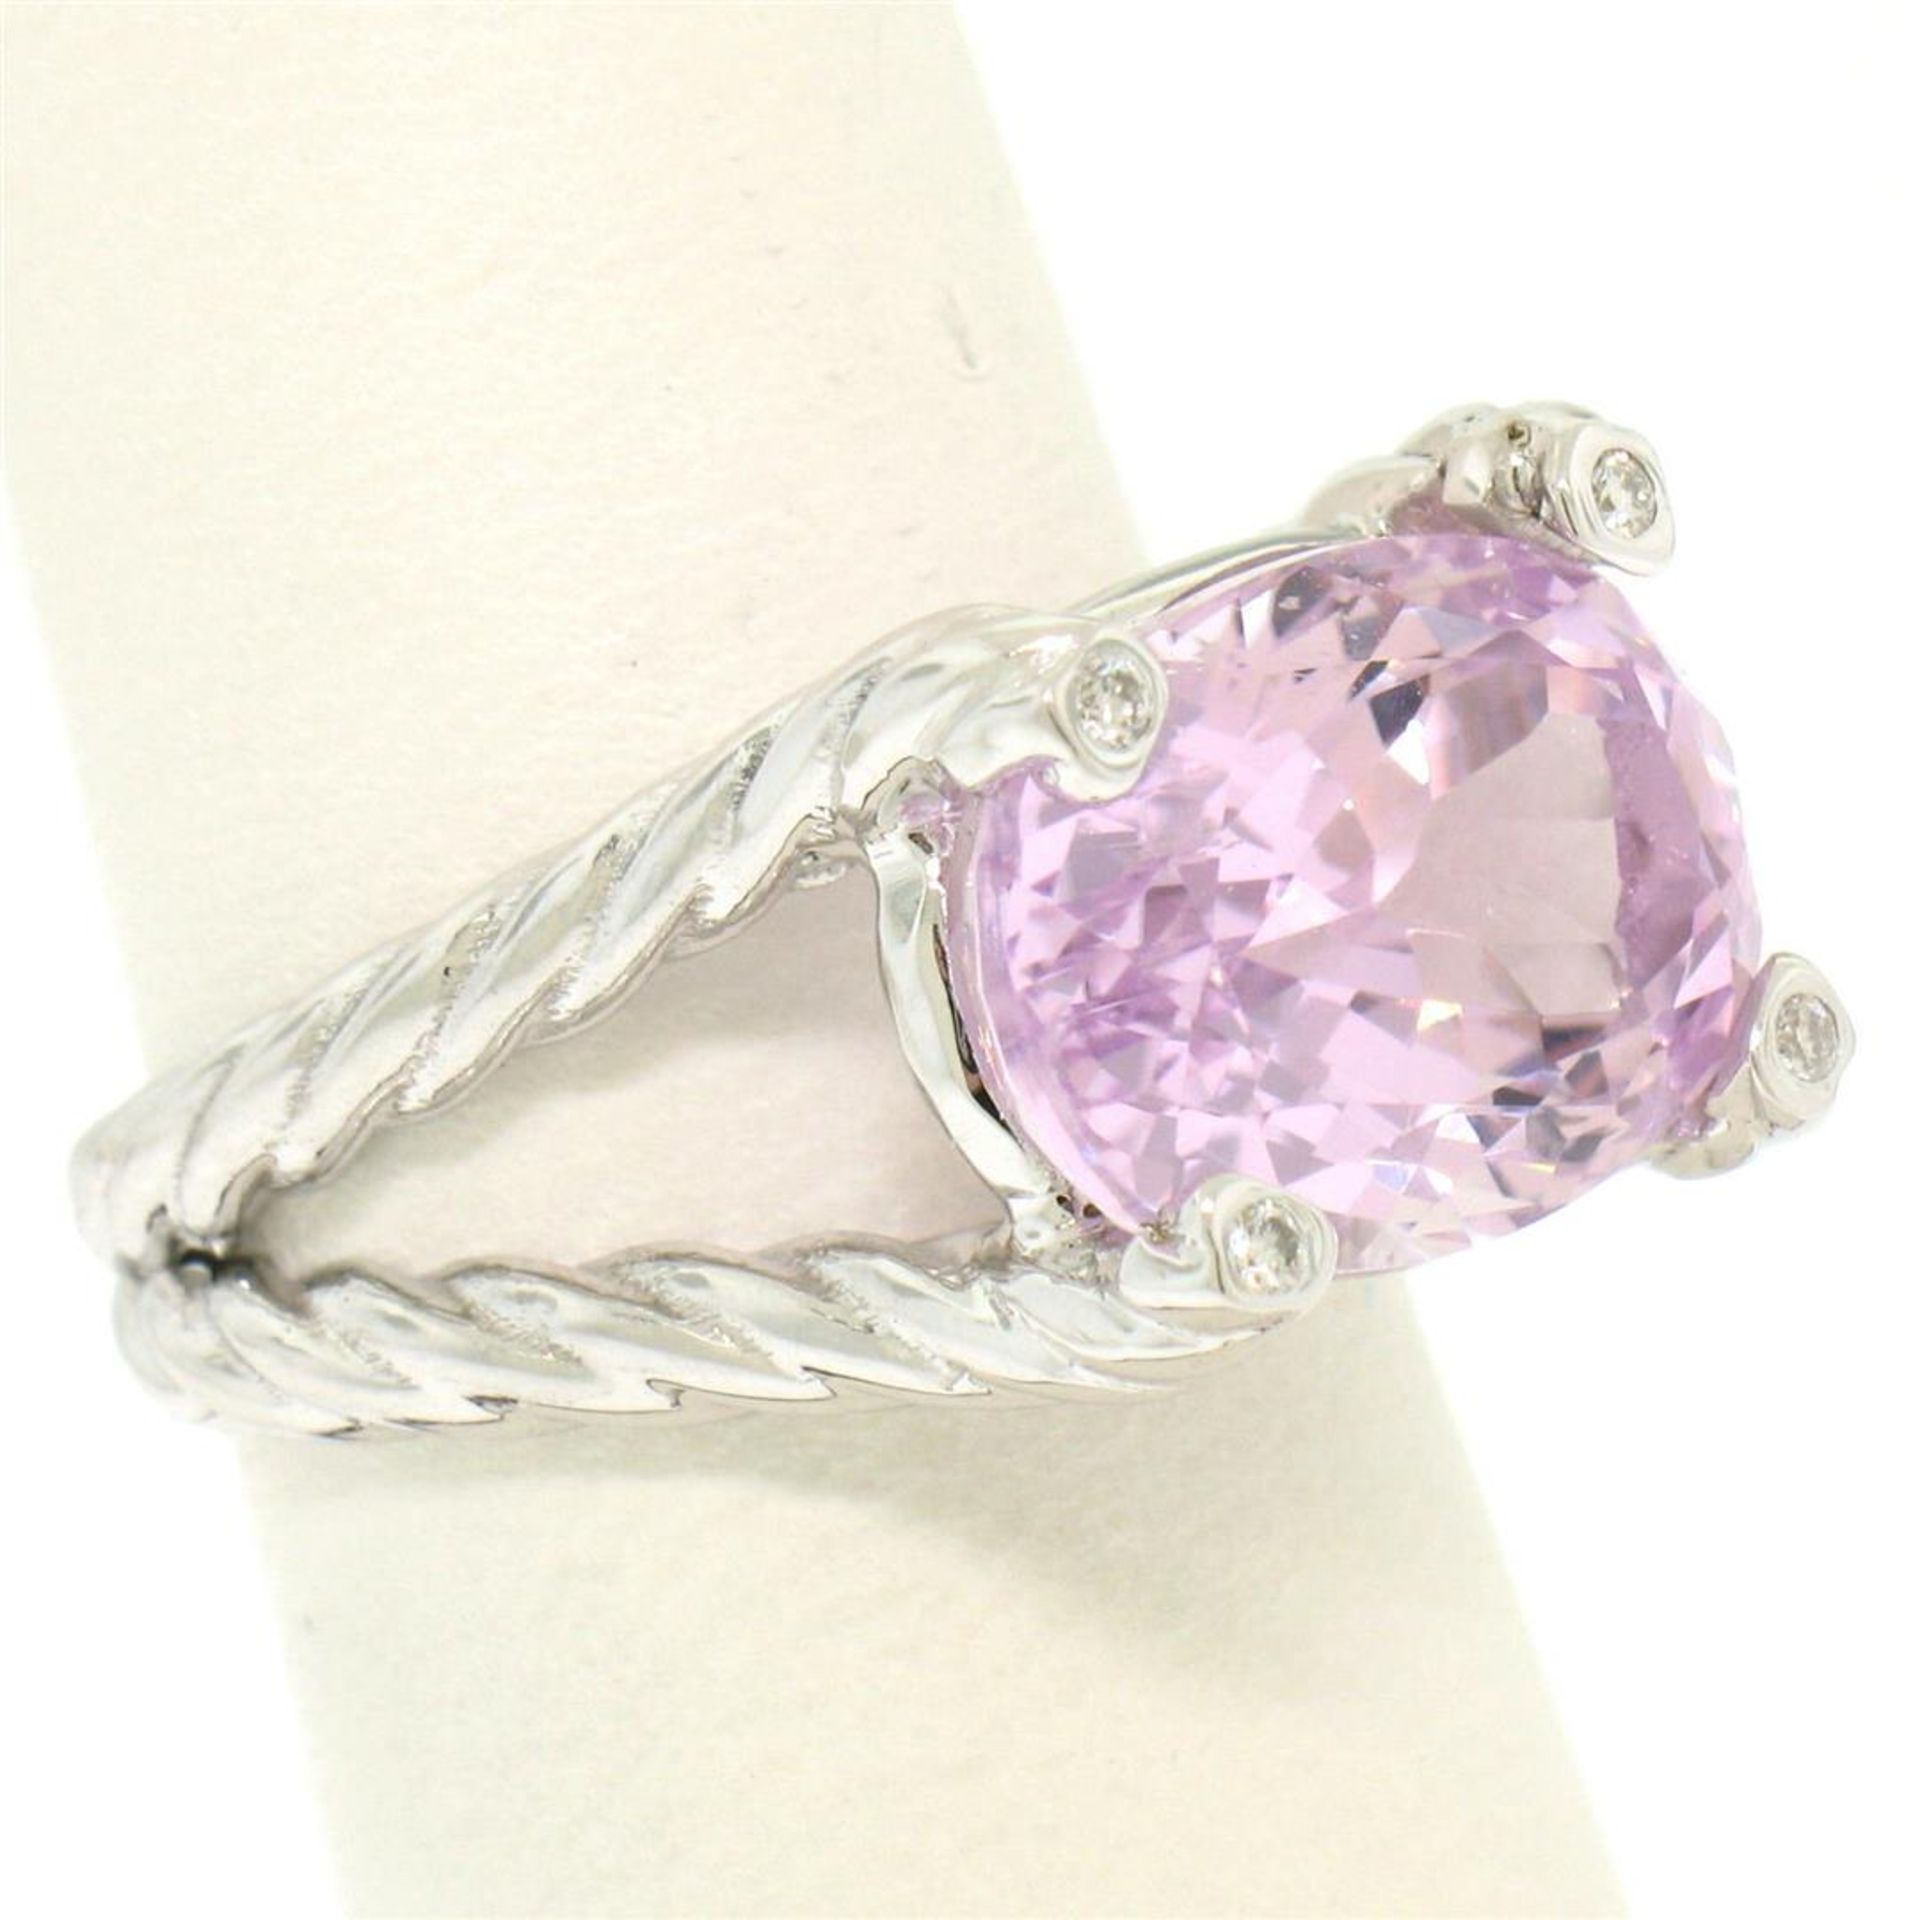 14k White Gold Twisted Cable 8.5 ct Oval Kunzite Solitaire Ring 4 Diamond Accent - Image 3 of 8